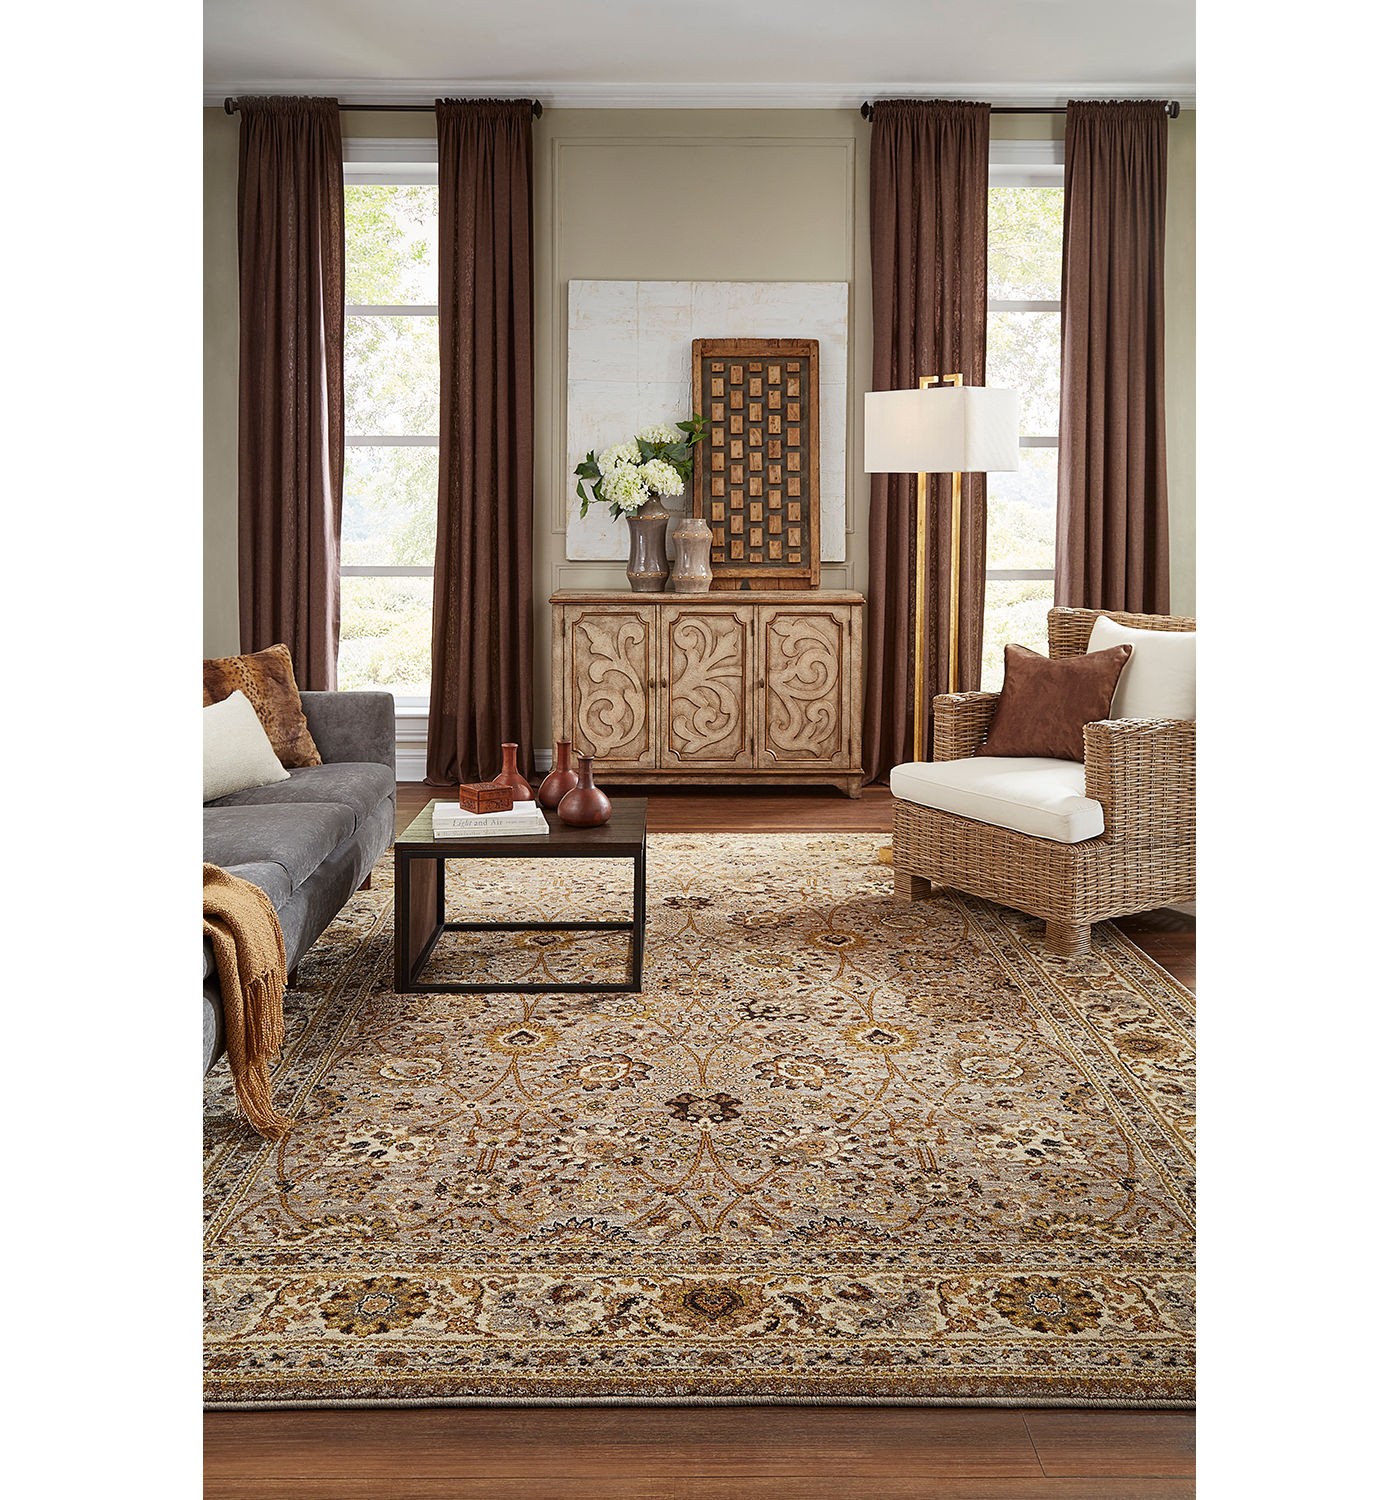 Curtains for window | Chillicothe Carpet